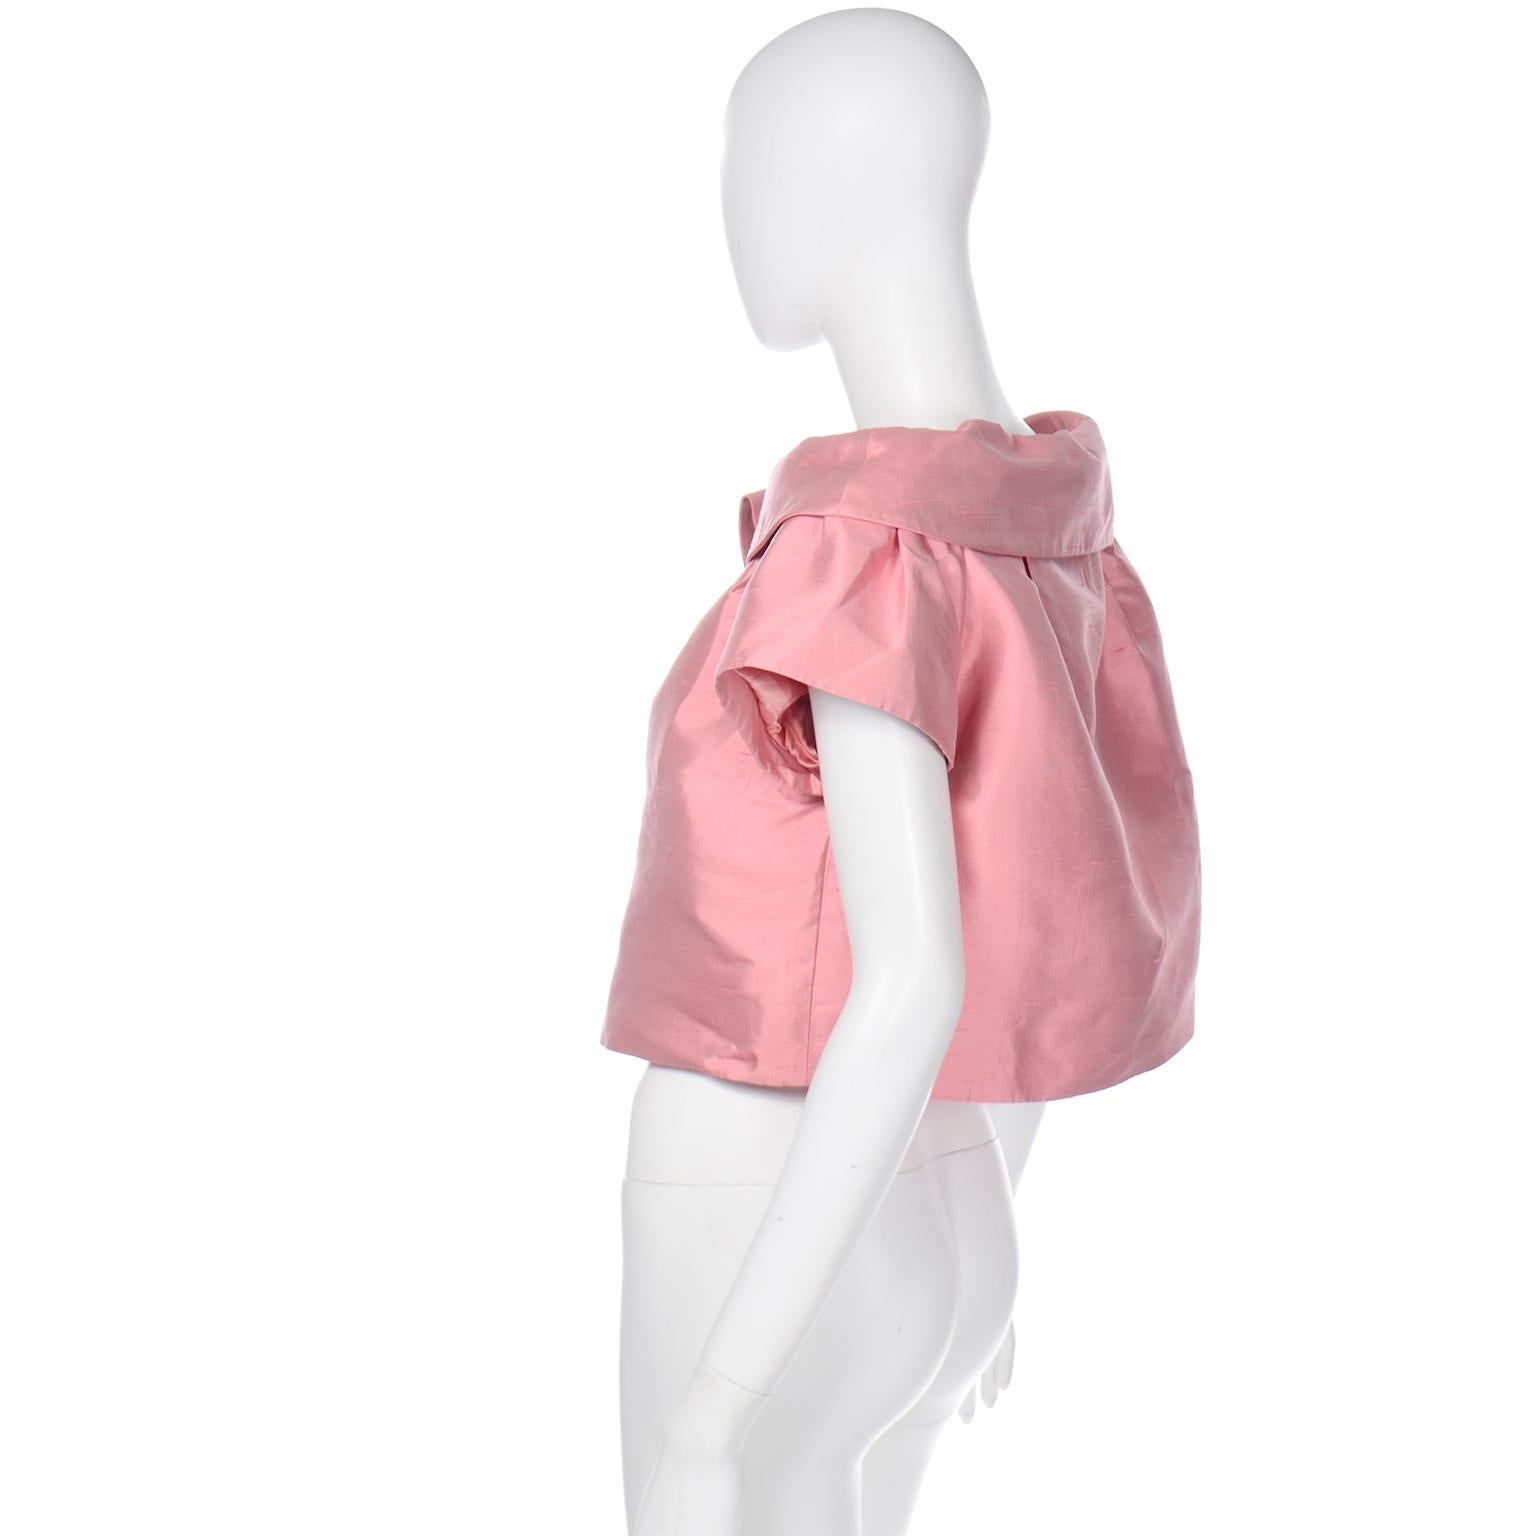 John Galliano for Christian Dior 1960s Inspired Pink 2008 Vintage Jacket Top 1